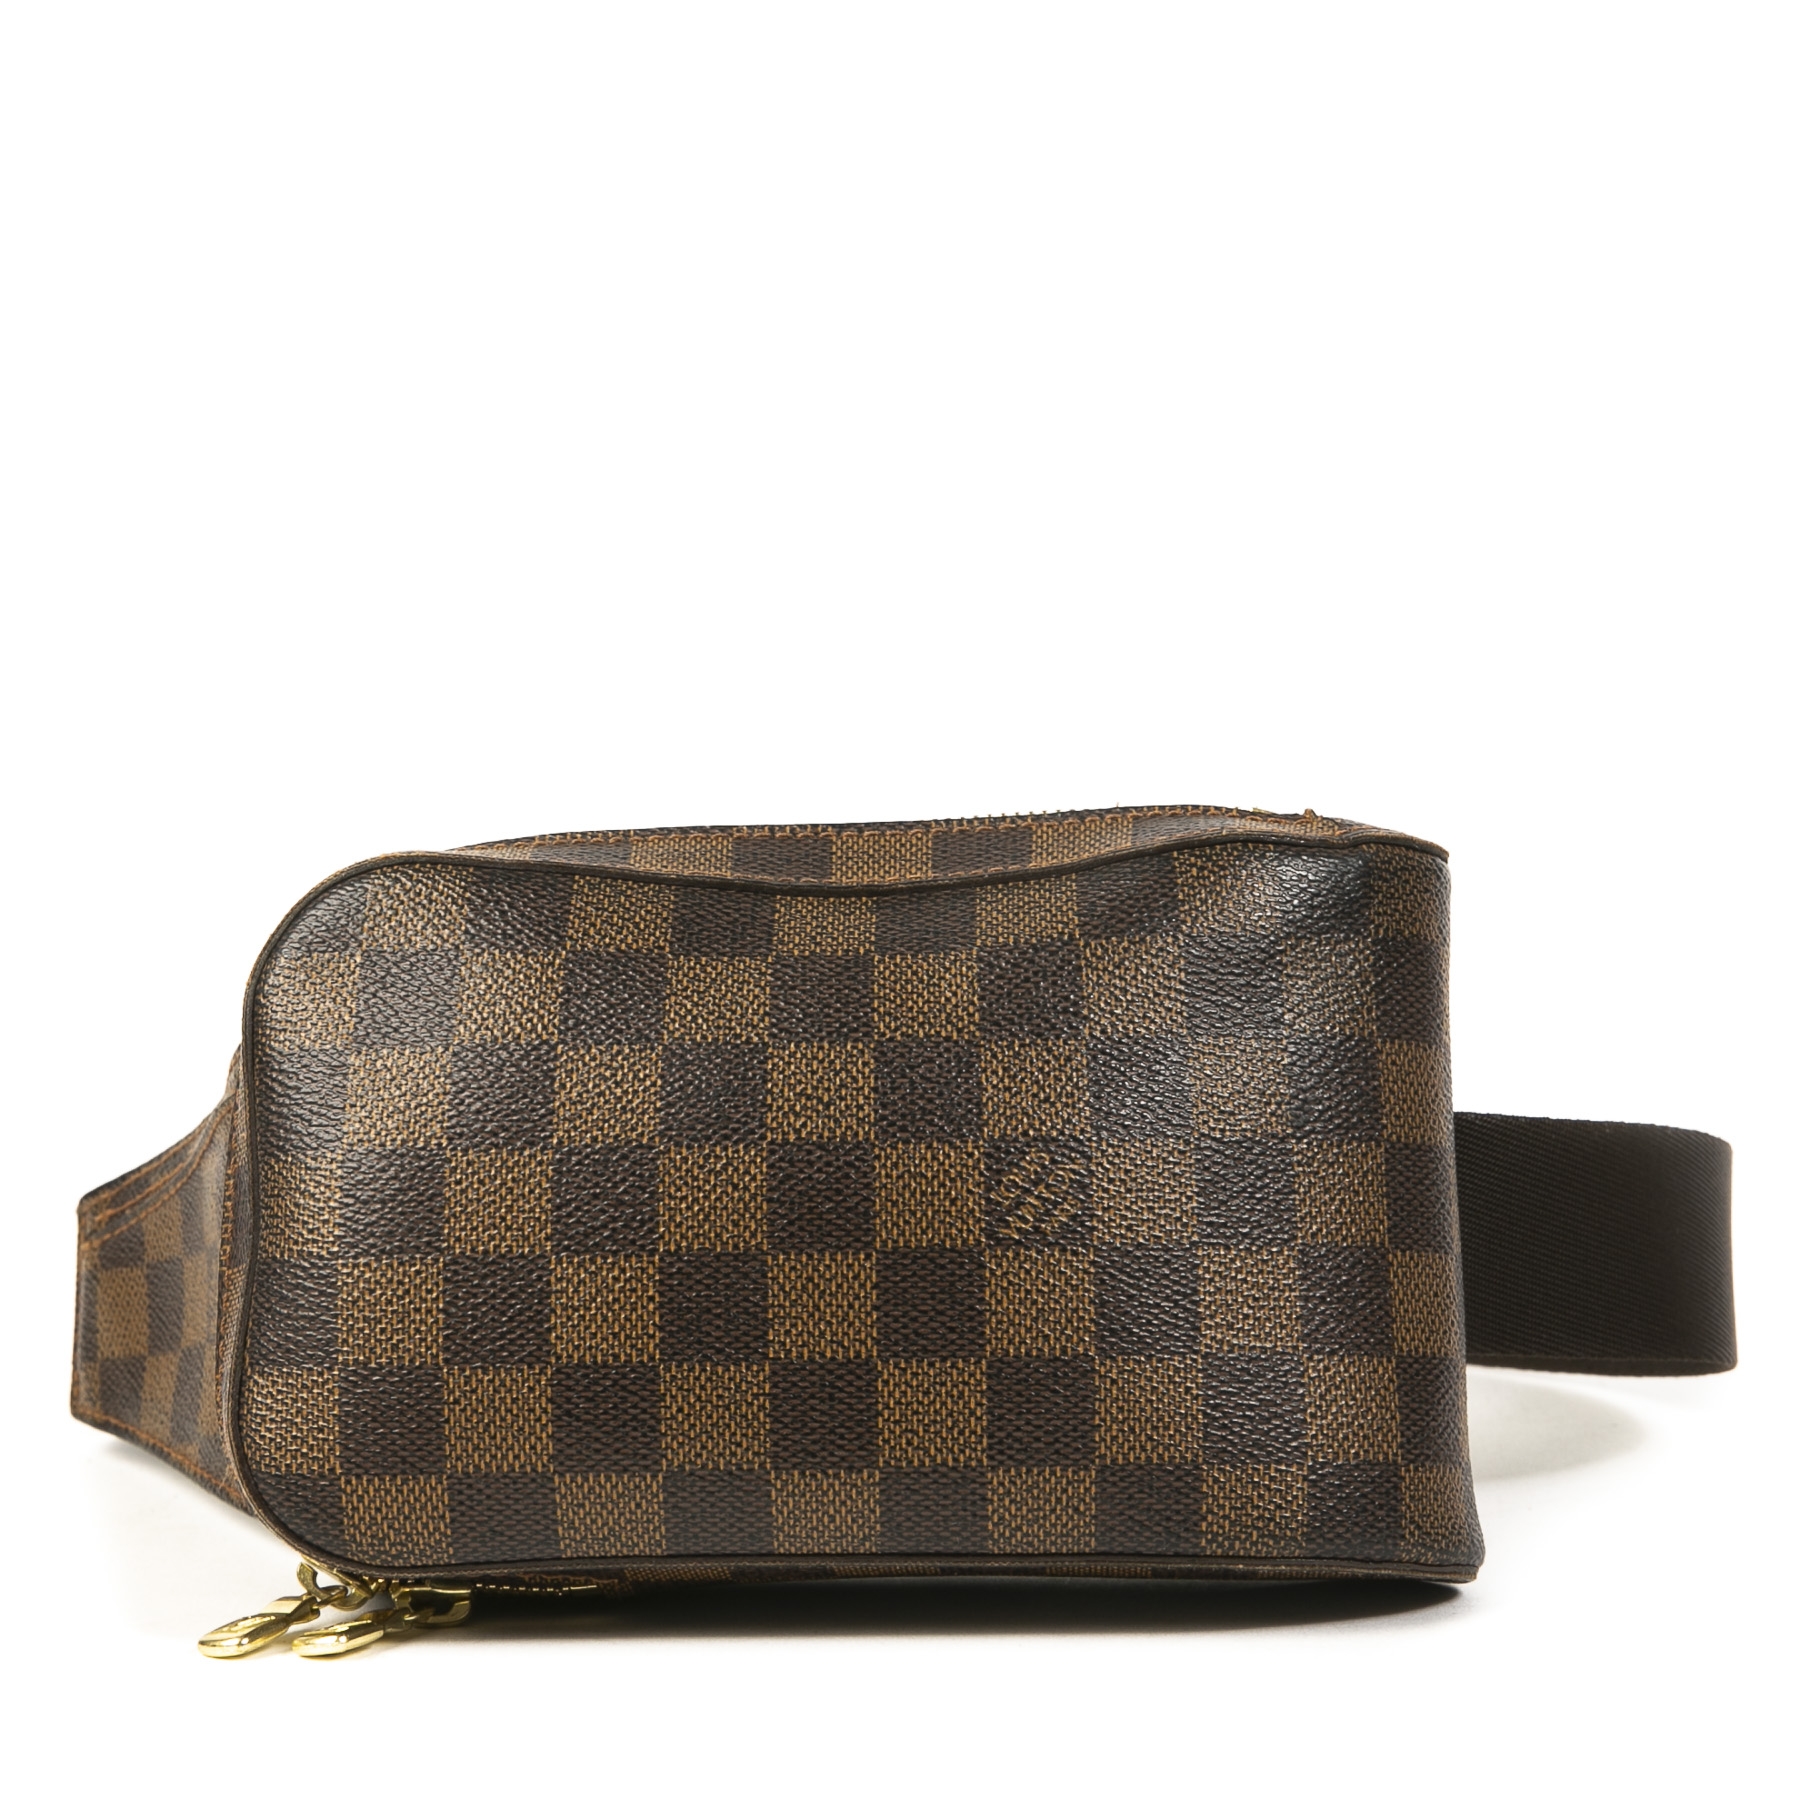 Luxury Finds - Preloved Authentic Louis Vuitton Geronimo